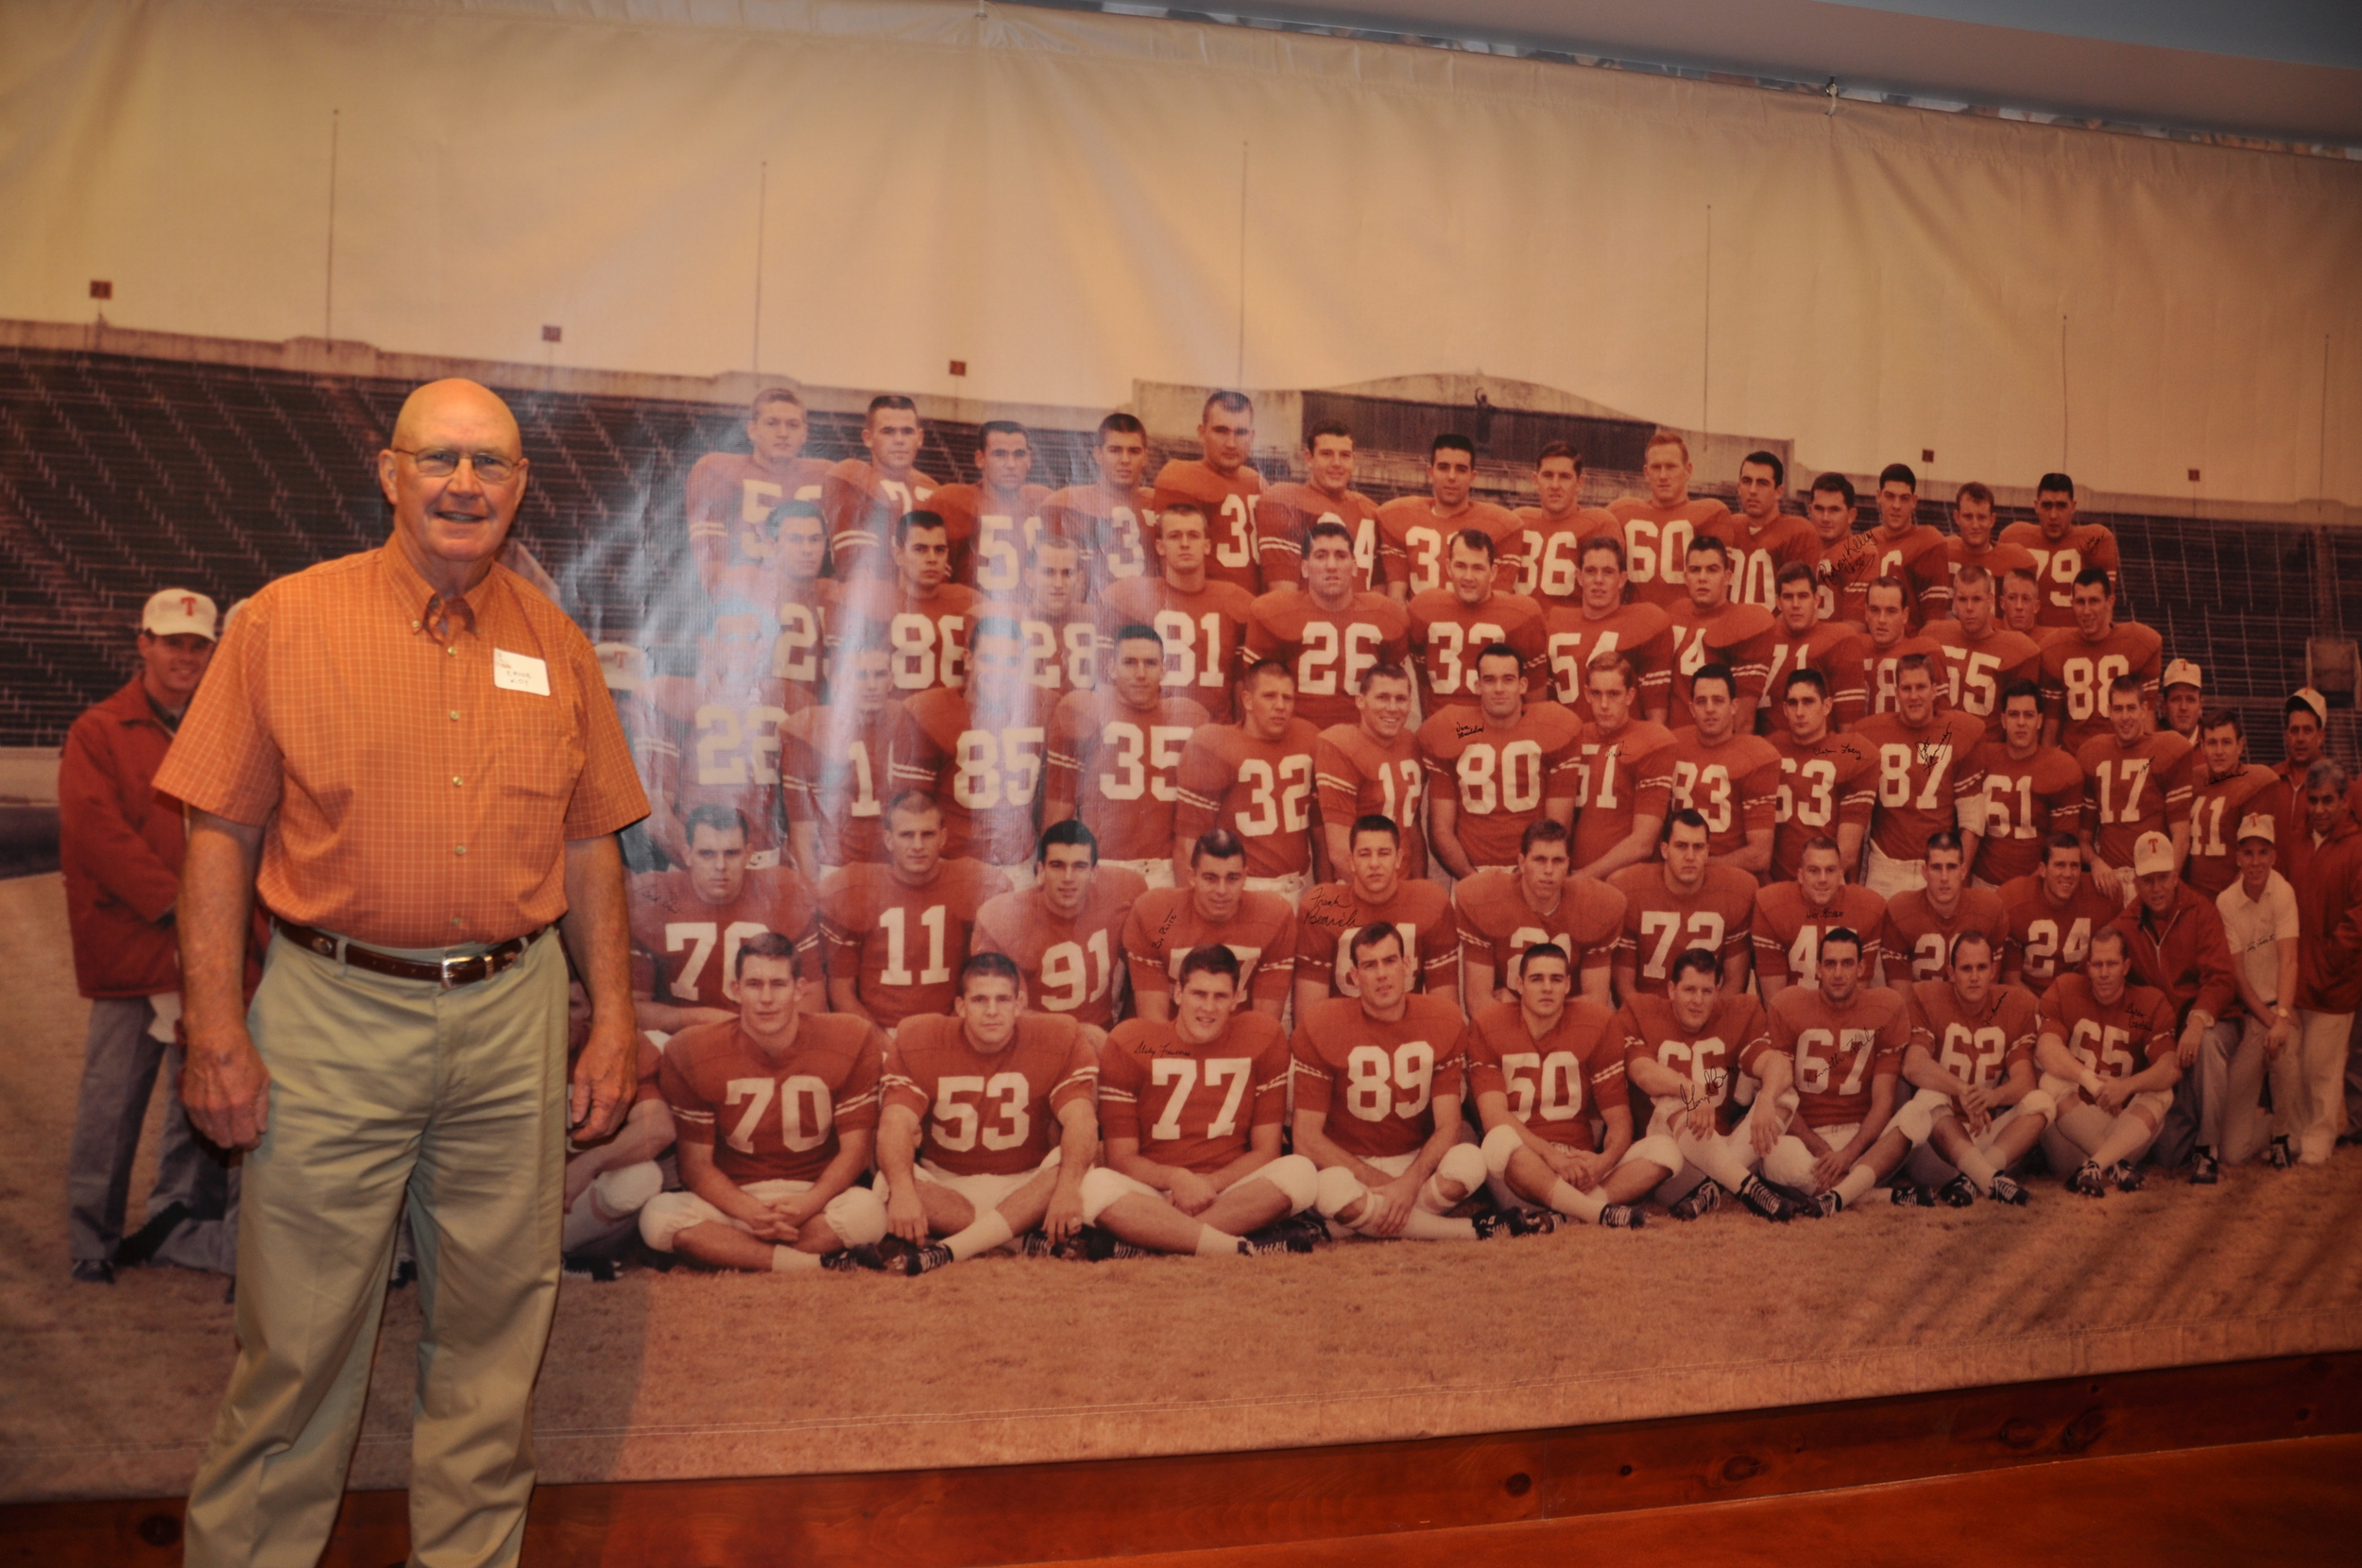  Ernie Koy with 1963 Championship picture